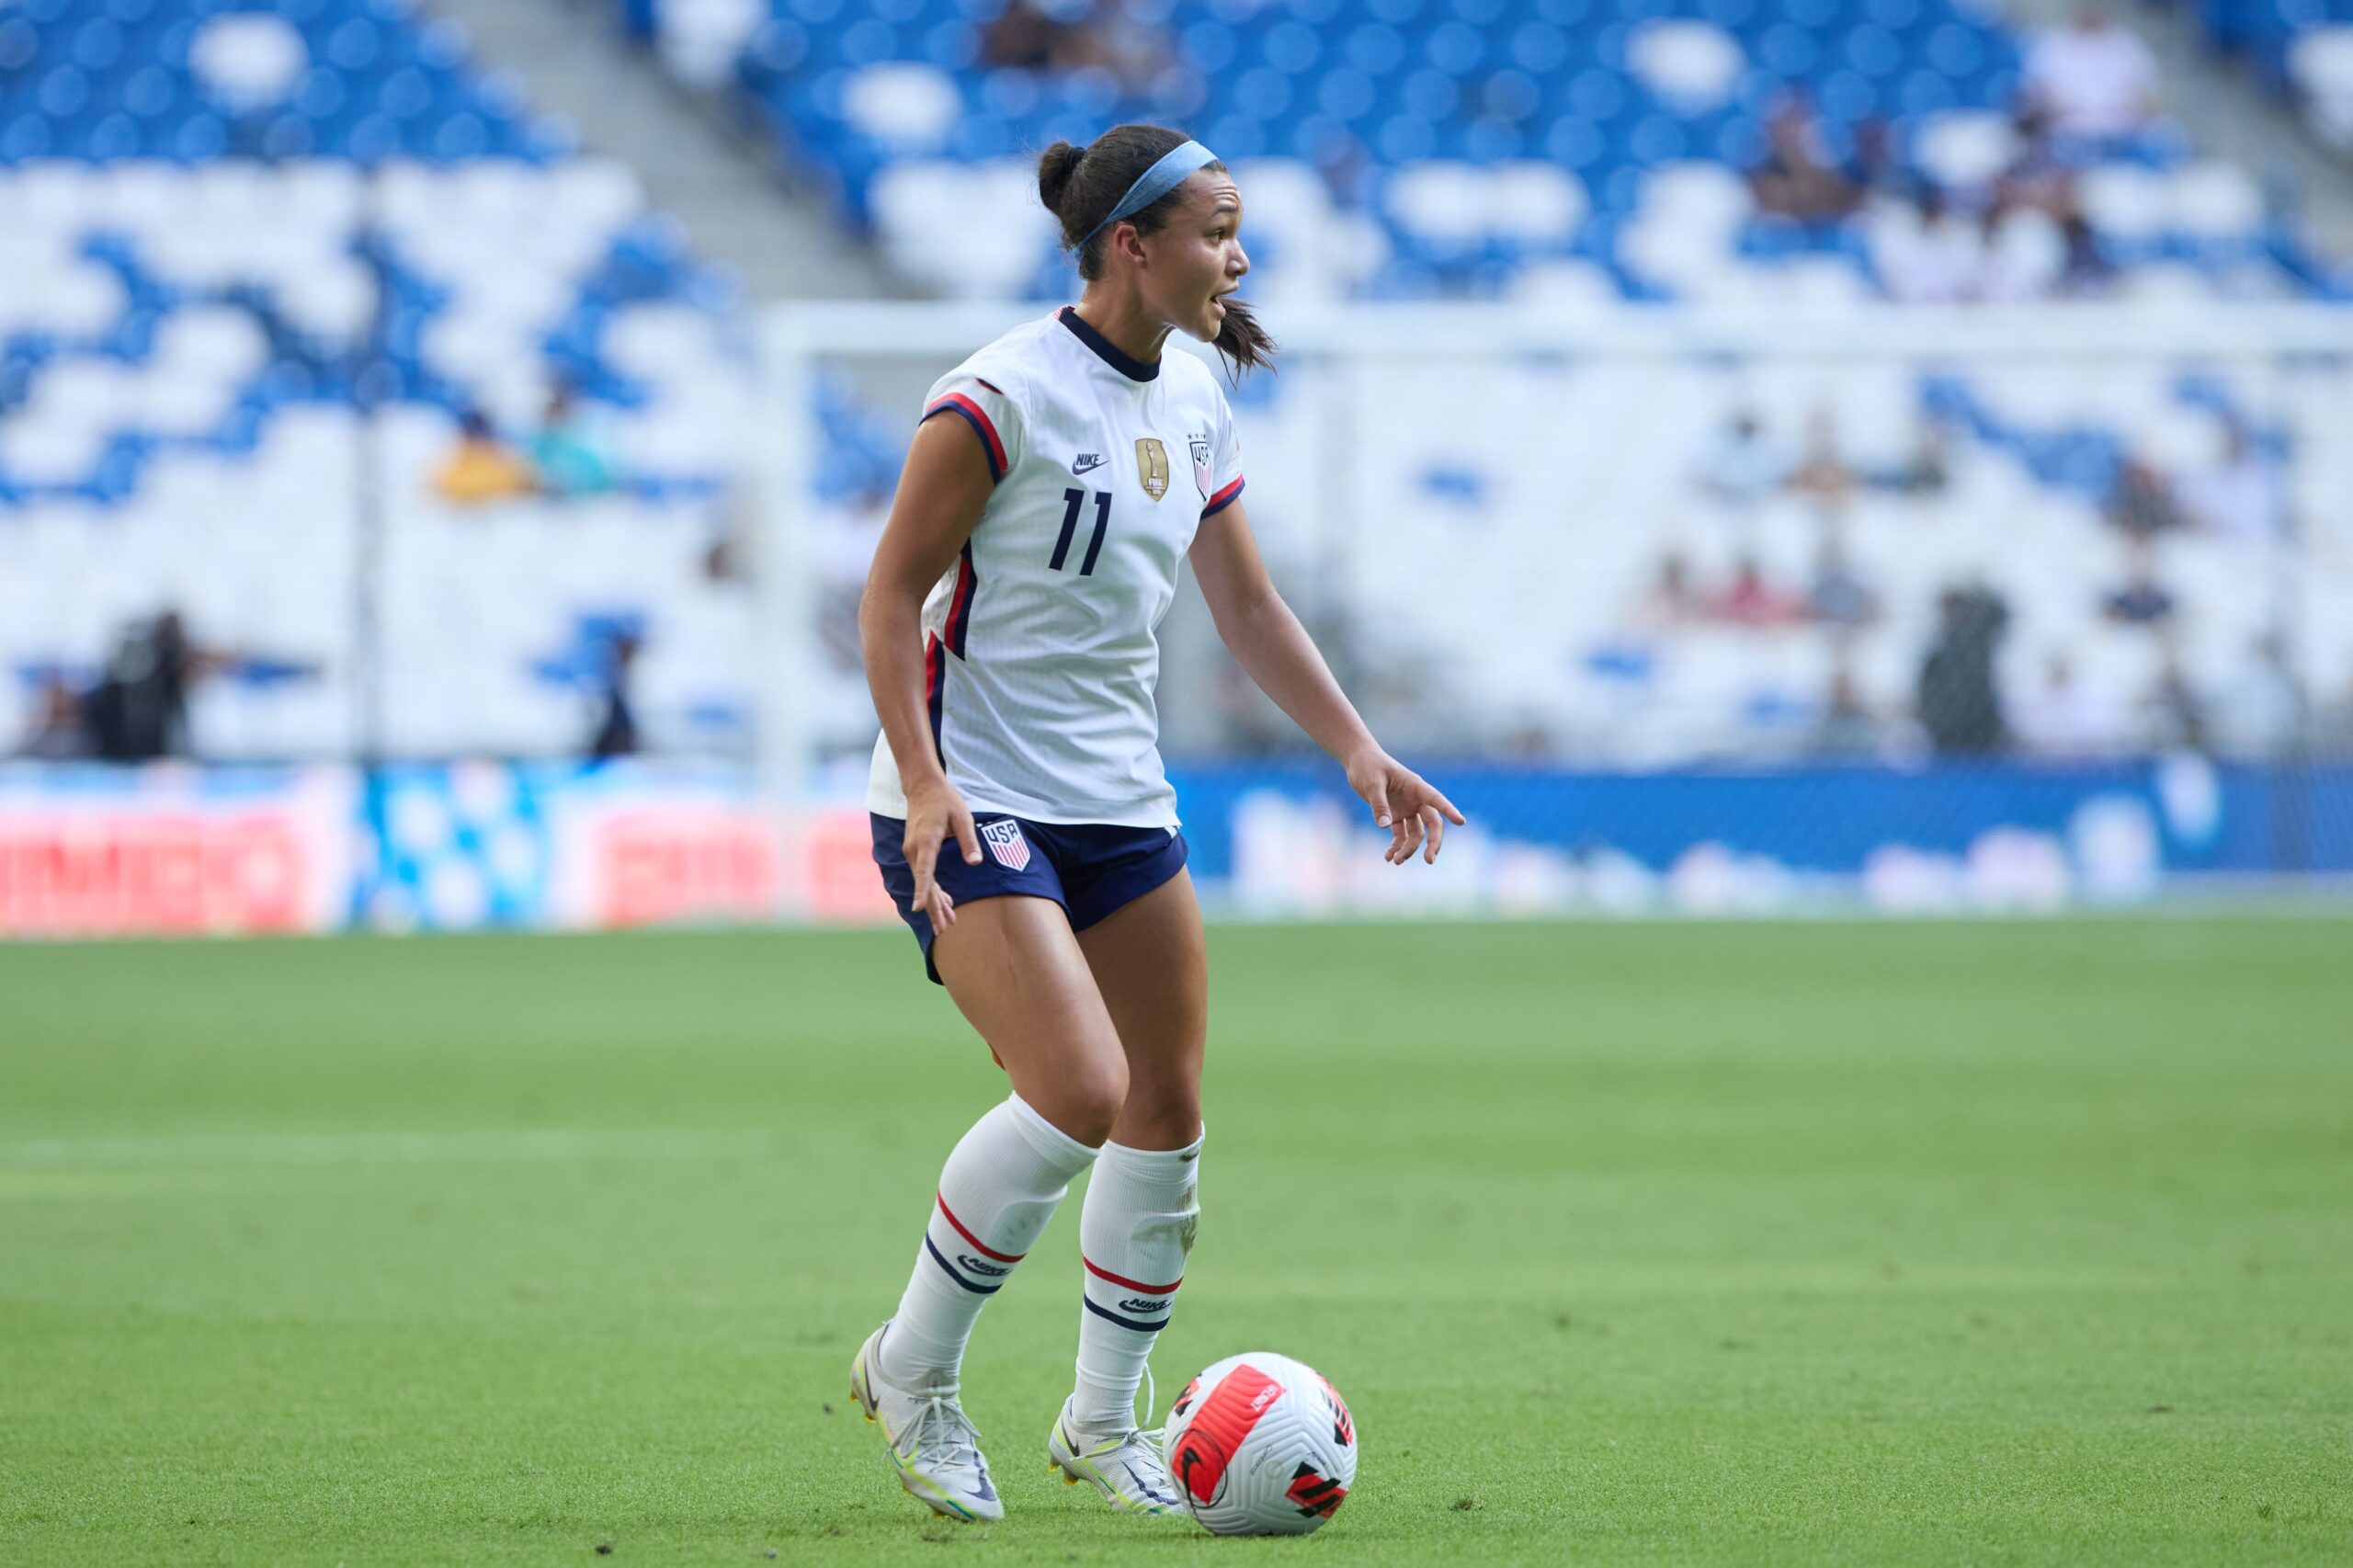 Sophia Smith is playing for the USA national team